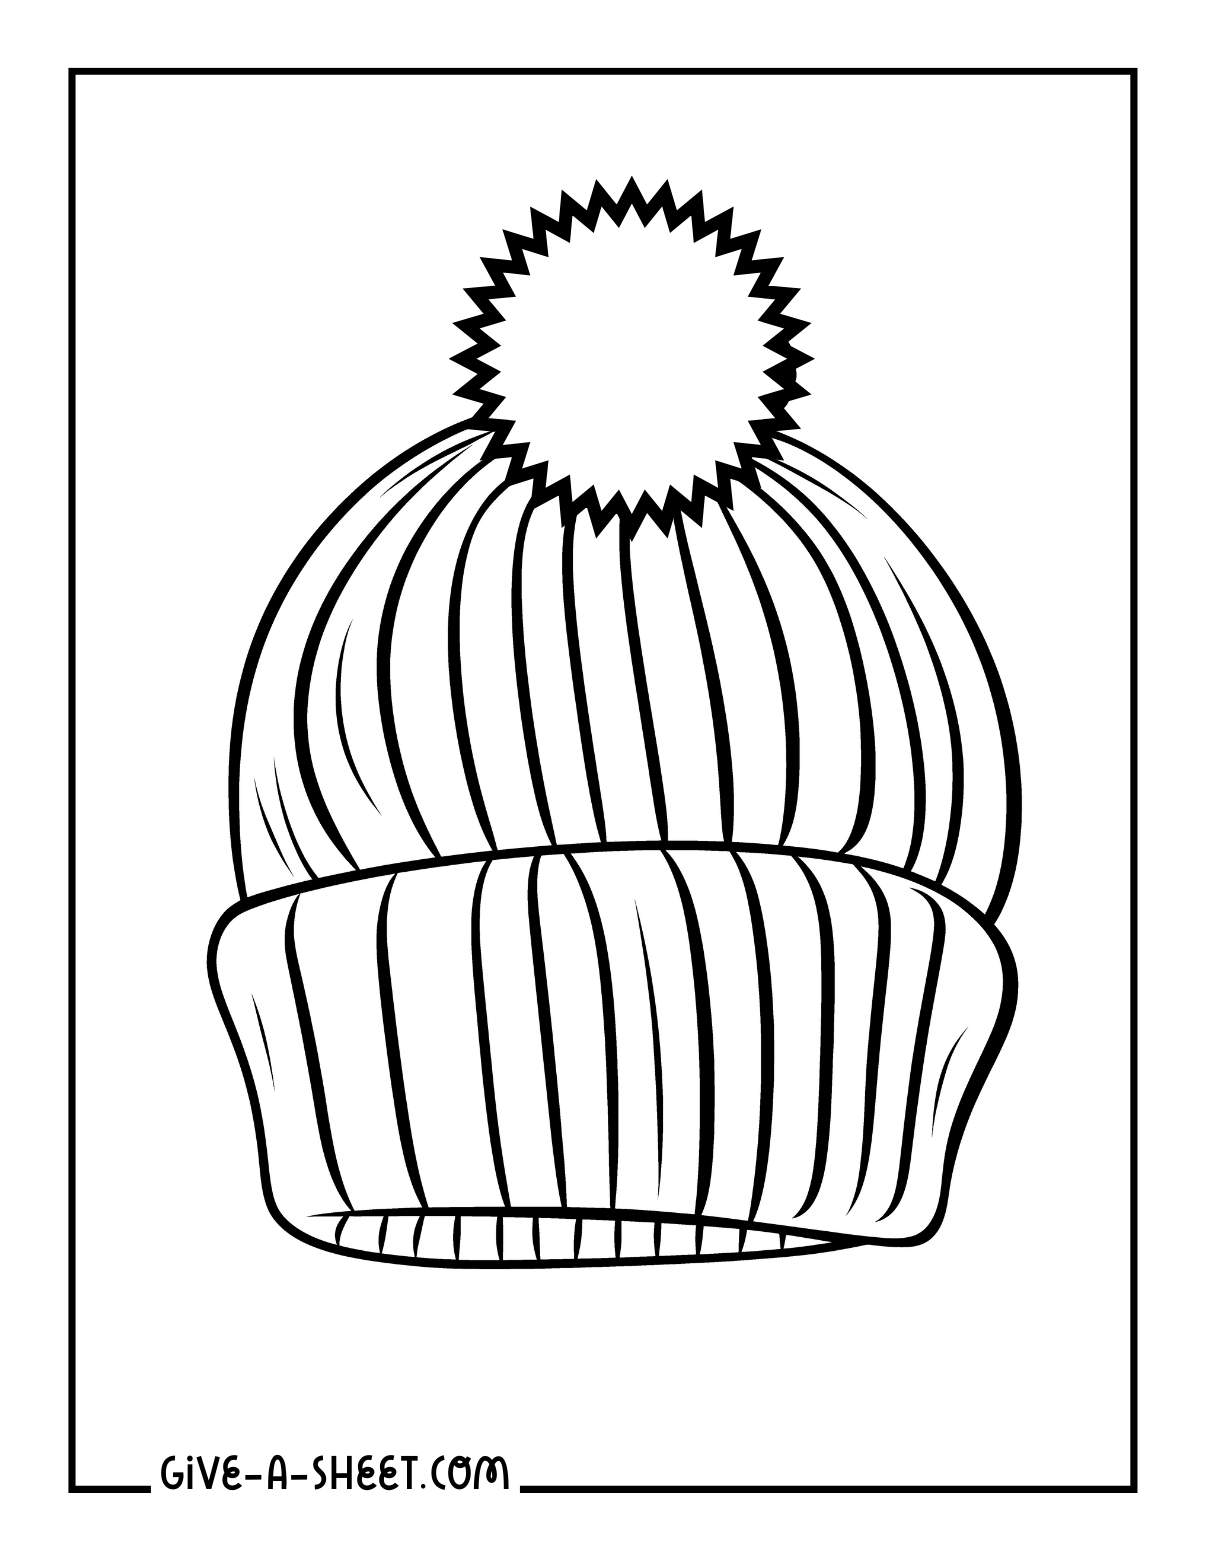 Winter tuque hat with pom pom outline coloring page.